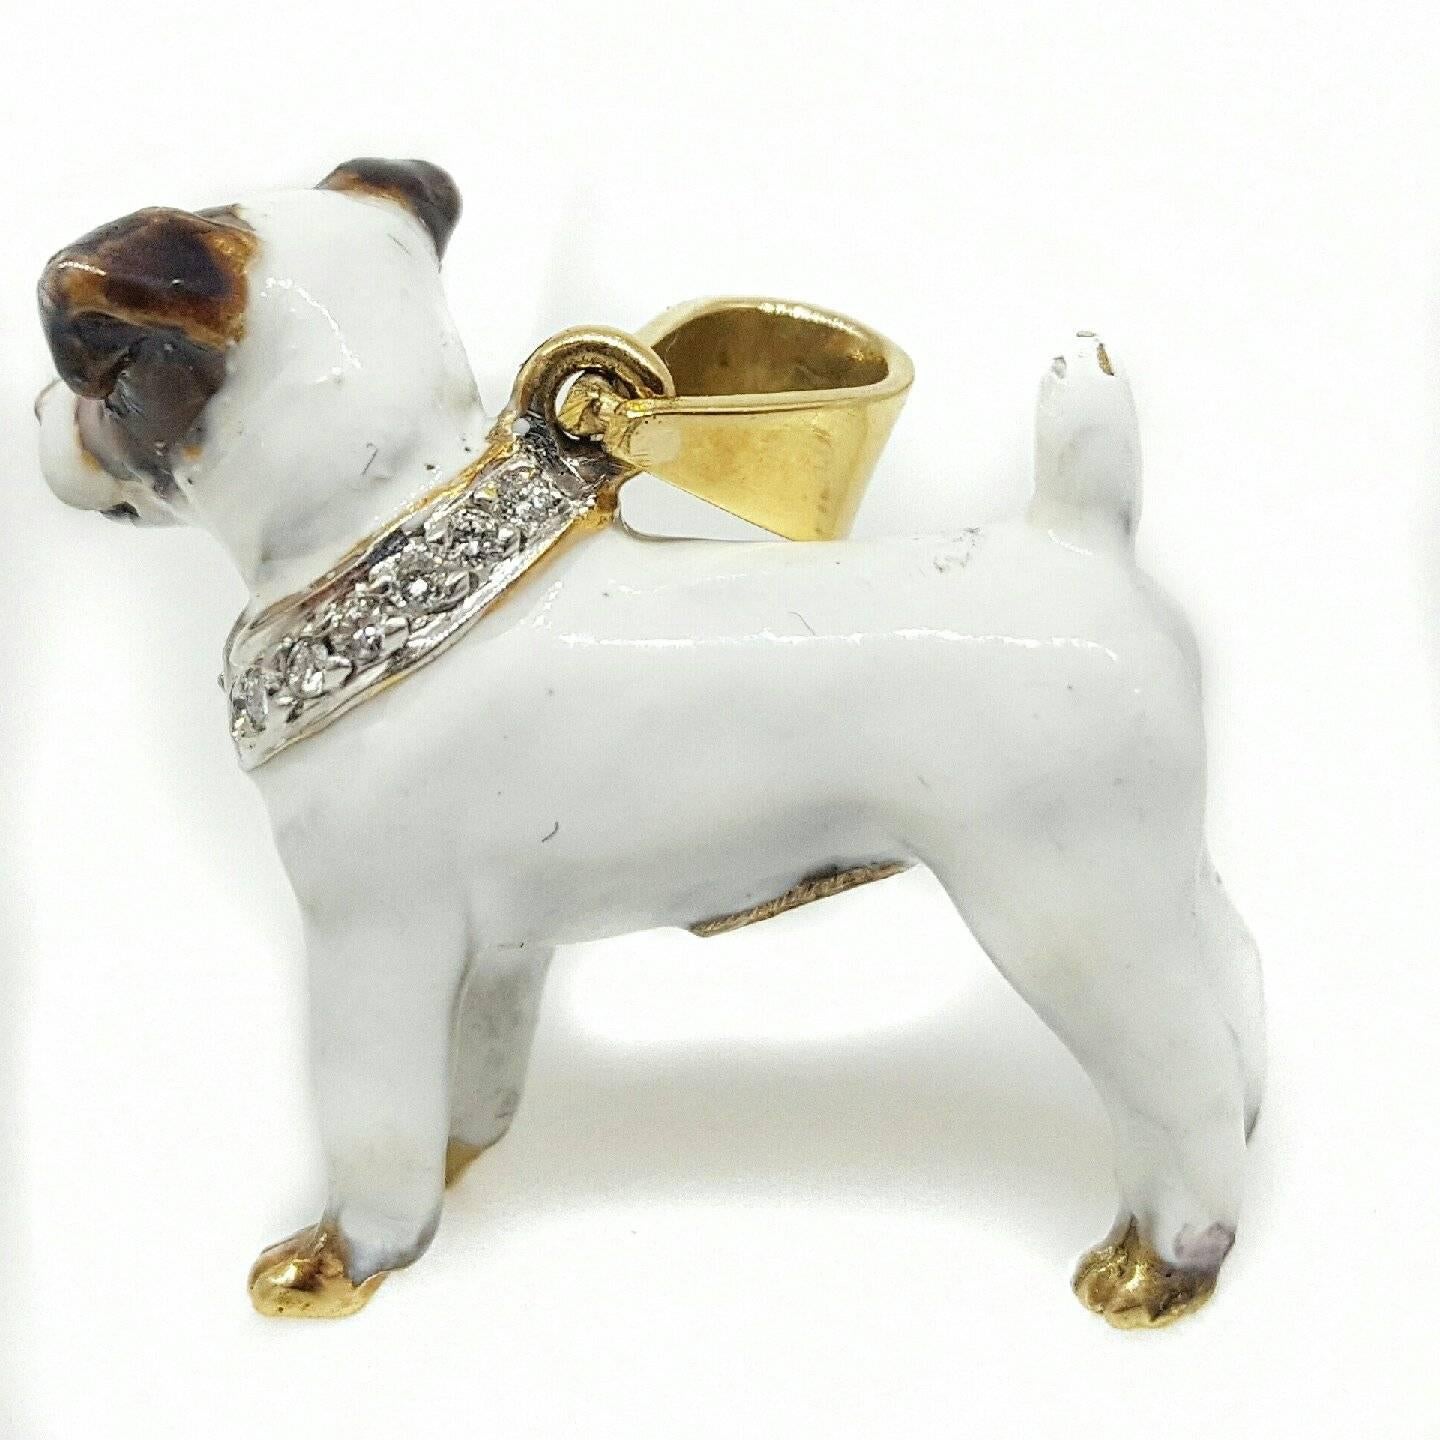 18 karat yellow gold Terrier pendant. The pendant is solid 18 karat yellow gold painted with enamel and set with round brilliant cut diamonds. The pendant measures 1